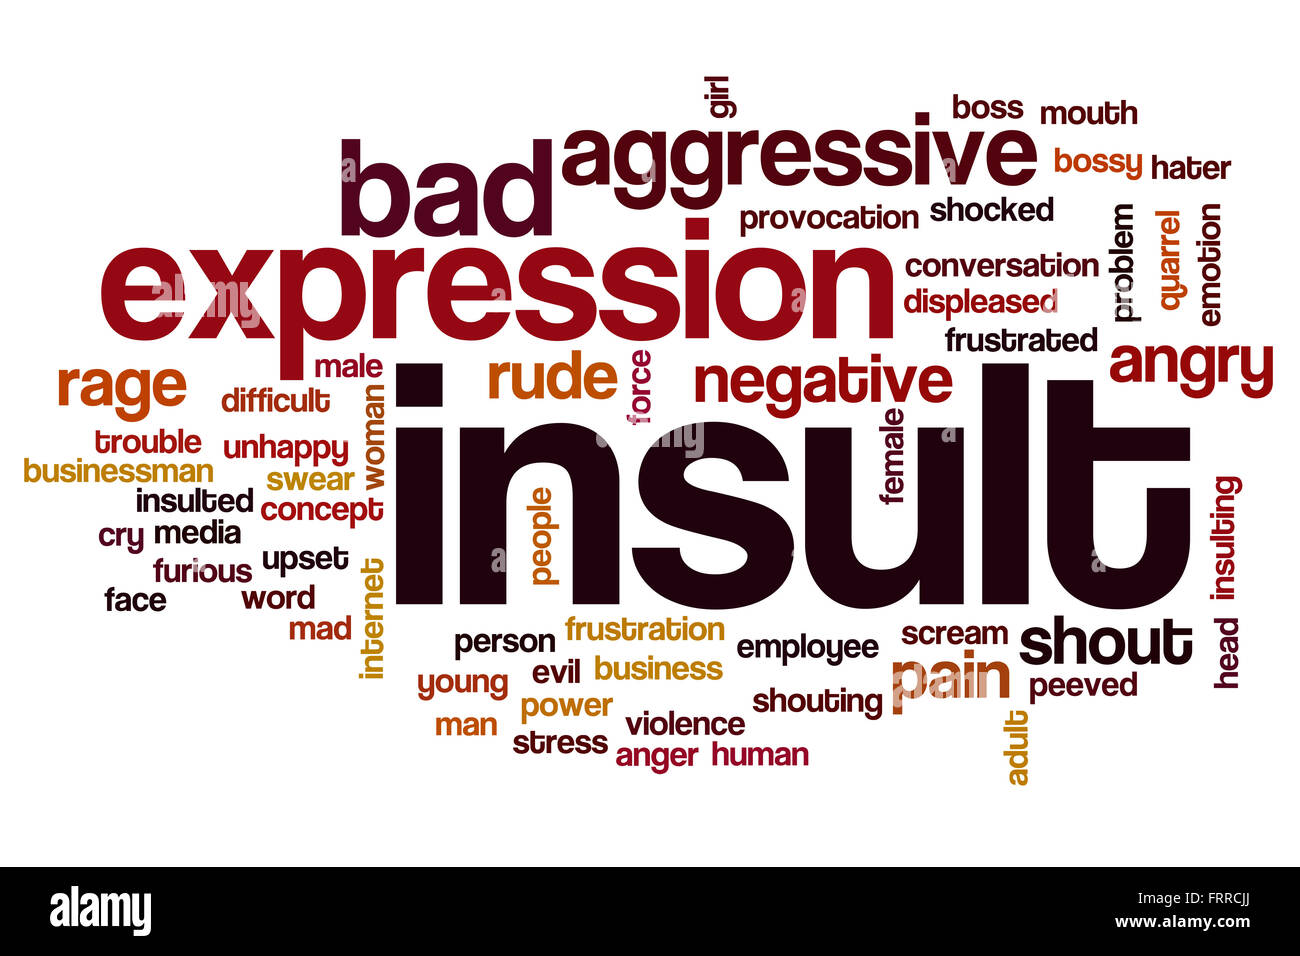 list of insulting words